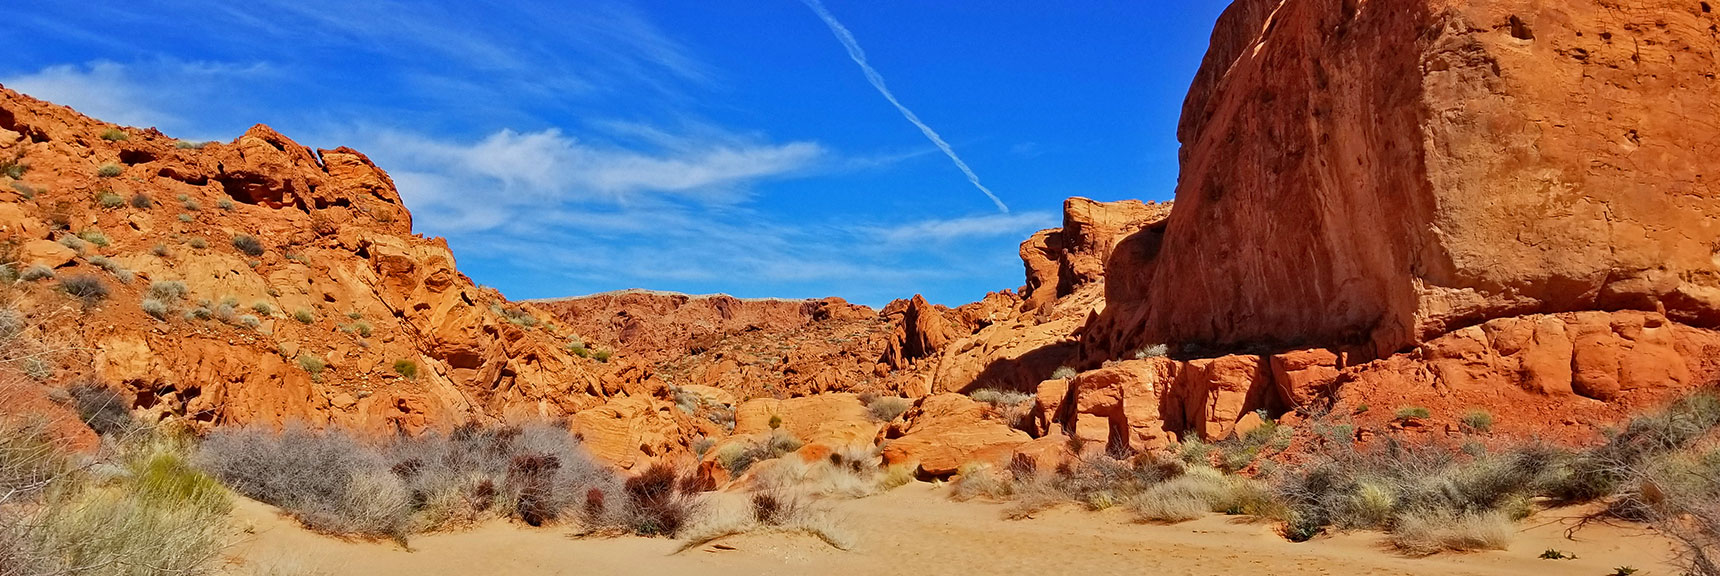 Entering Fire Canyon on Natural Arches Trail, Valley of Fire State Park, Nevada